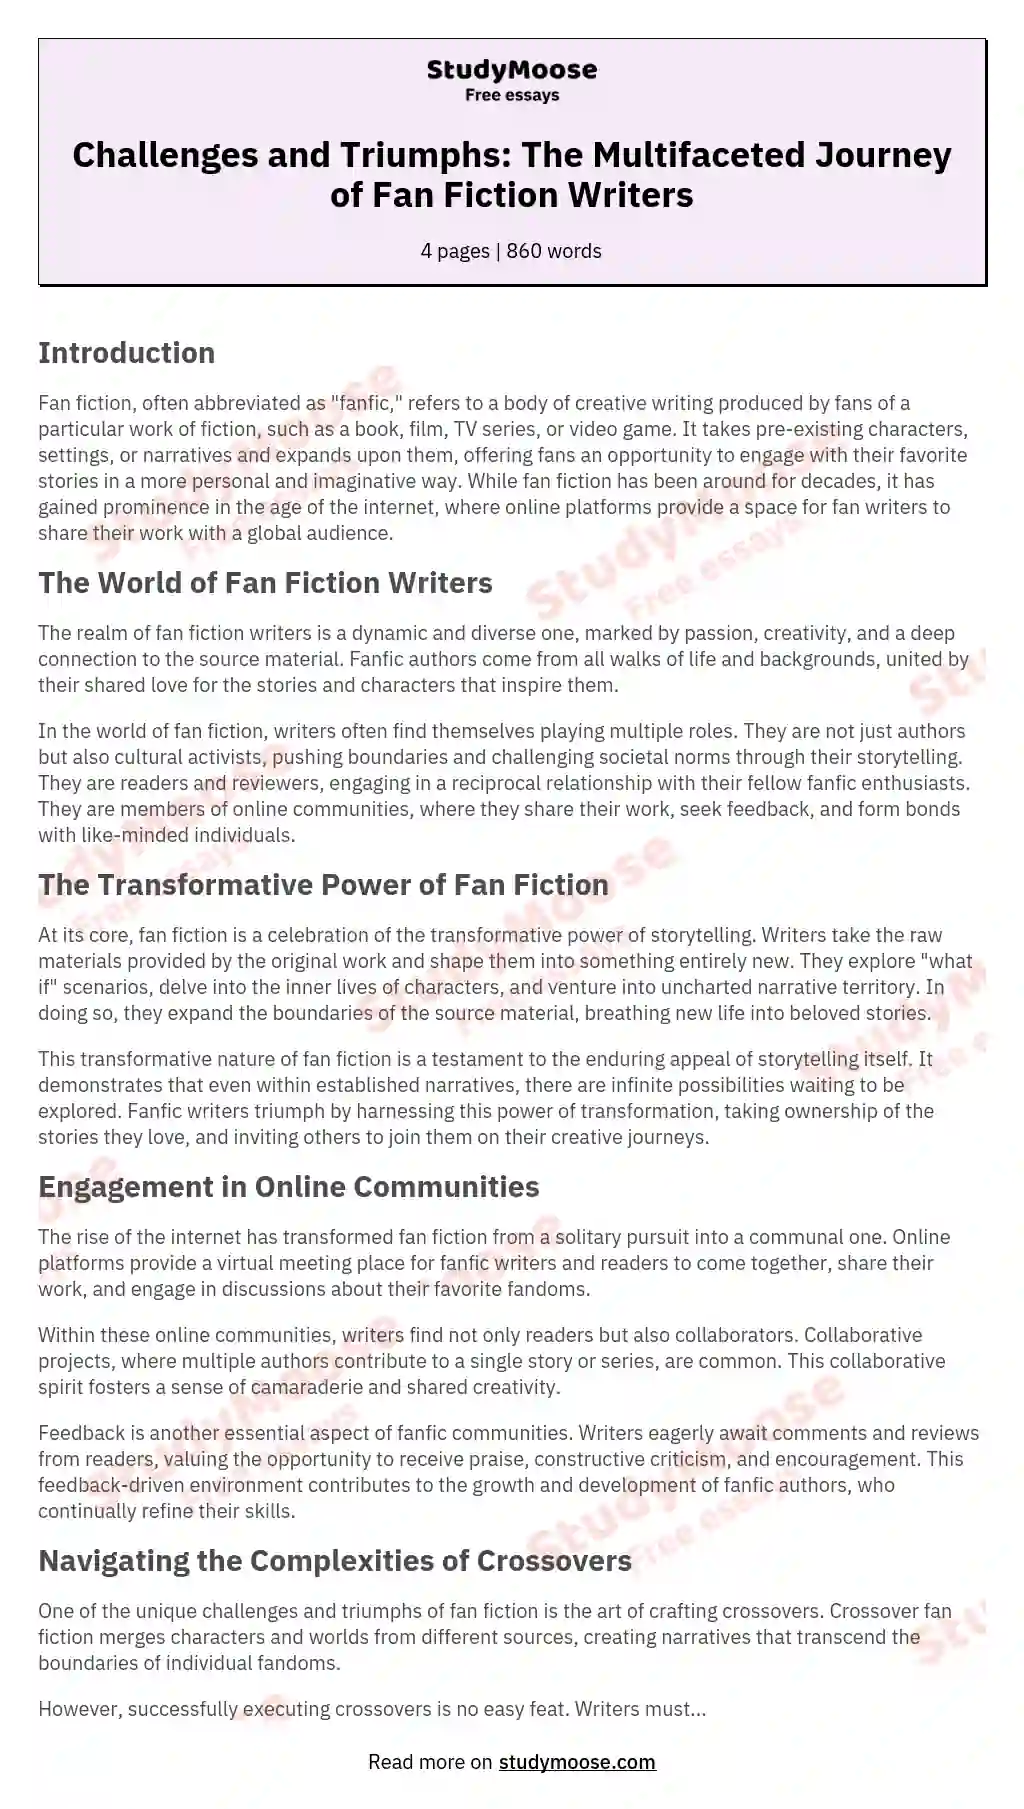 Challenges and Triumphs: The Multifaceted Journey of Fan Fiction Writers essay